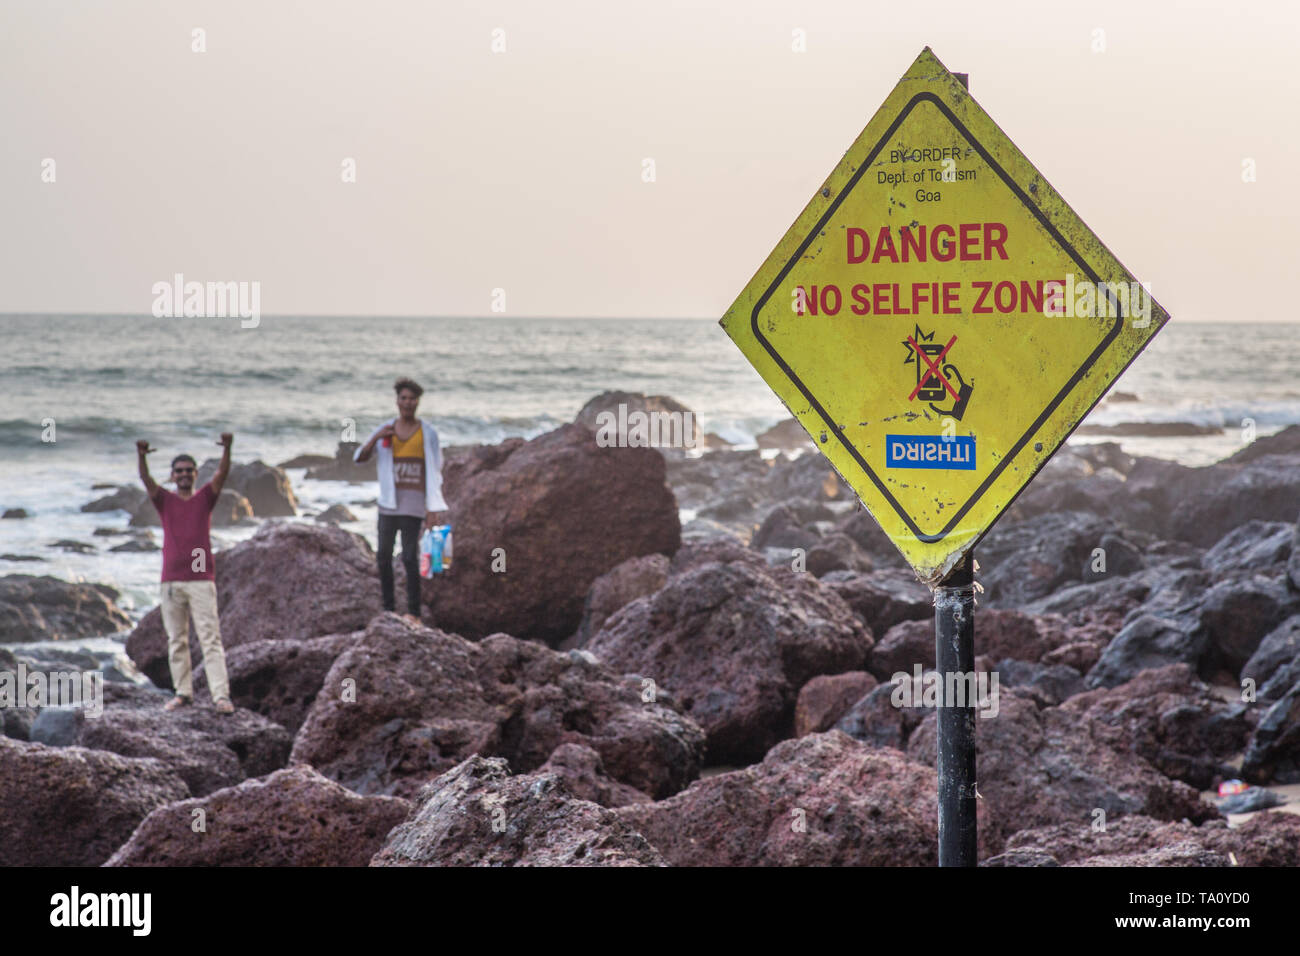 A sign warning visitors from shooting selfies on the rocks in this tropical location while people in the background are ignoring the same. Stock Photo